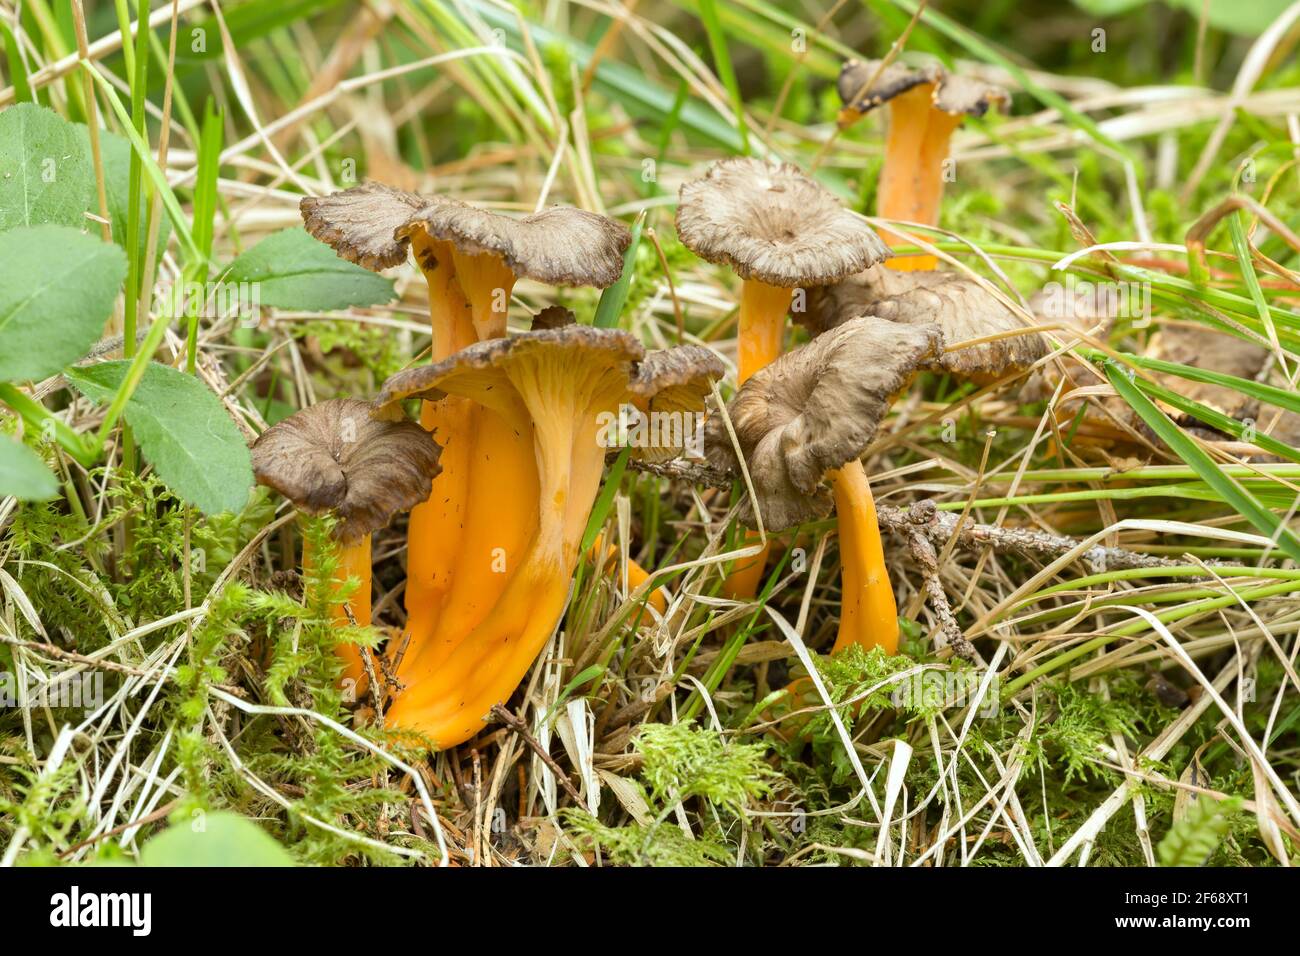 Yellow foot, Craterellus lutescens growing in natural environment Stock Photo